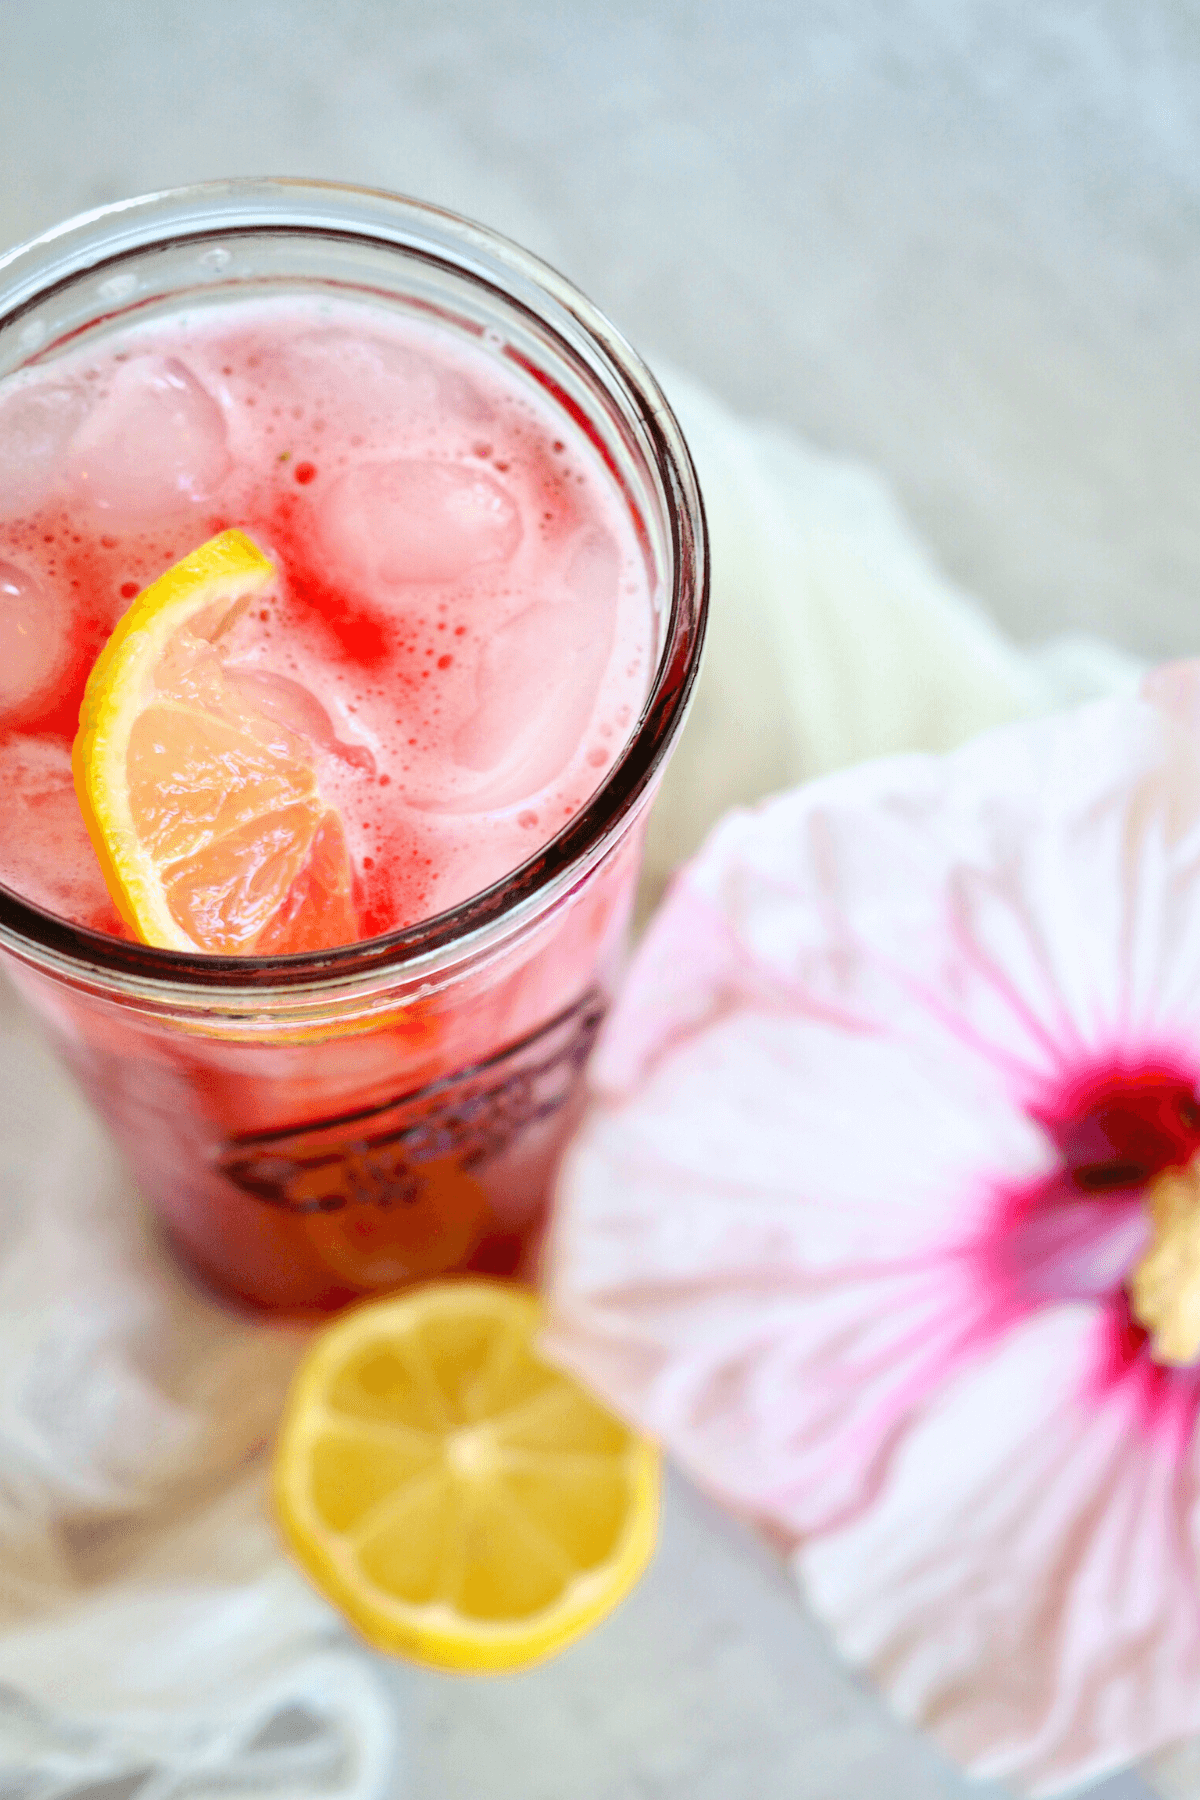 Starbuck Passion Tea Lemonade Recipe in glass Starbuck's cup with fresh hibiscus flower and slice of lemon.